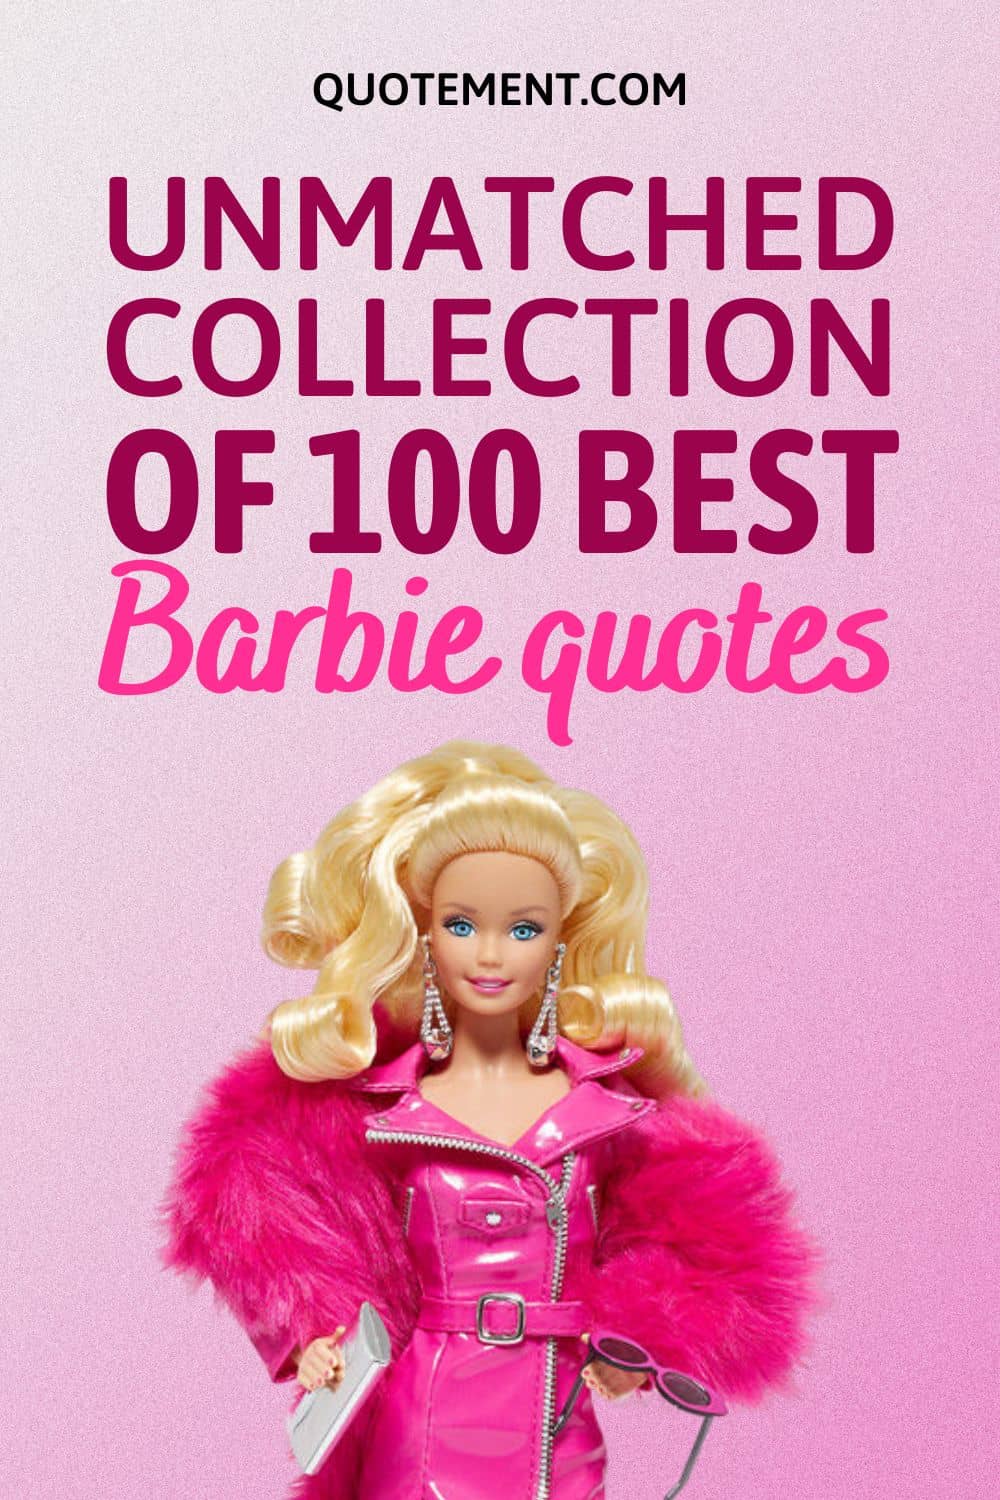 Unmatched List Of 100 Most Powerful Barbie Quotes To Read
